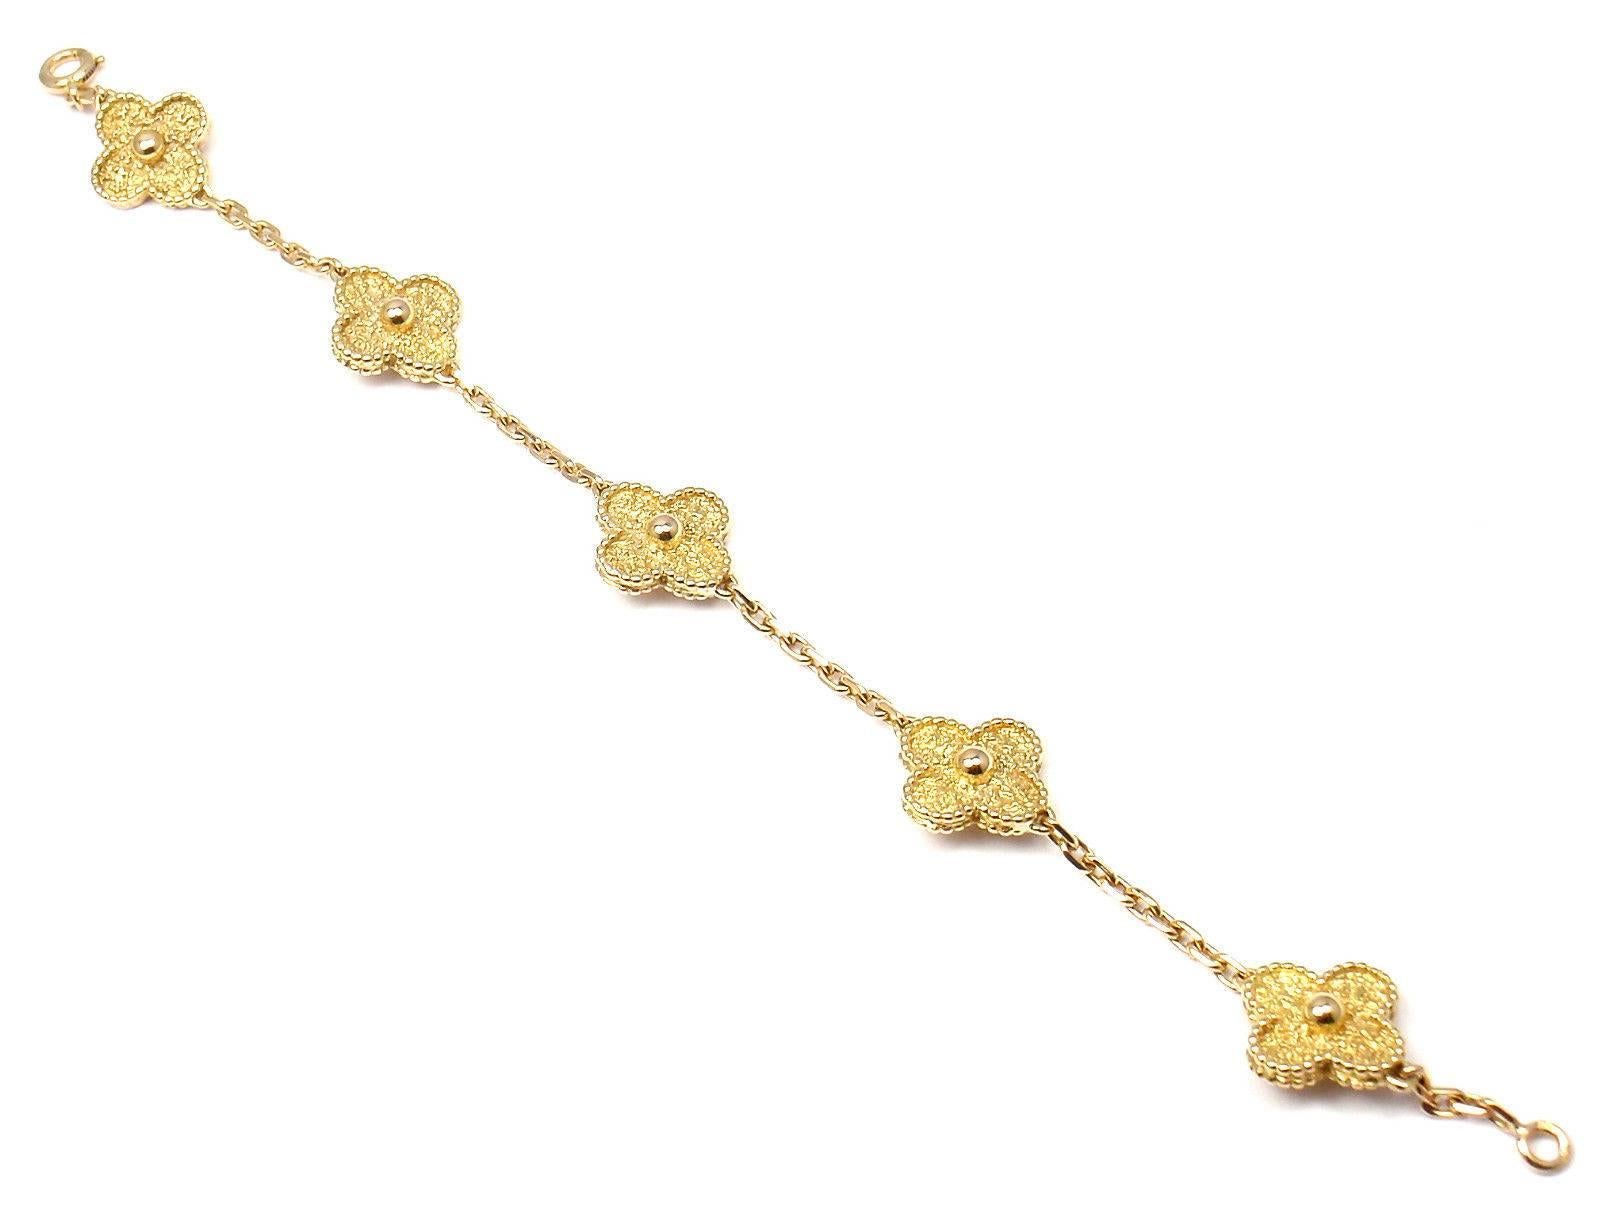 18k Yellow Gold Vintage Alhambra Yellow Gold Bracelet by Van Cleef & Arpels. 
With five Motifs made out of 18k Yellow Gold.

Details:
Length: 7 1/4